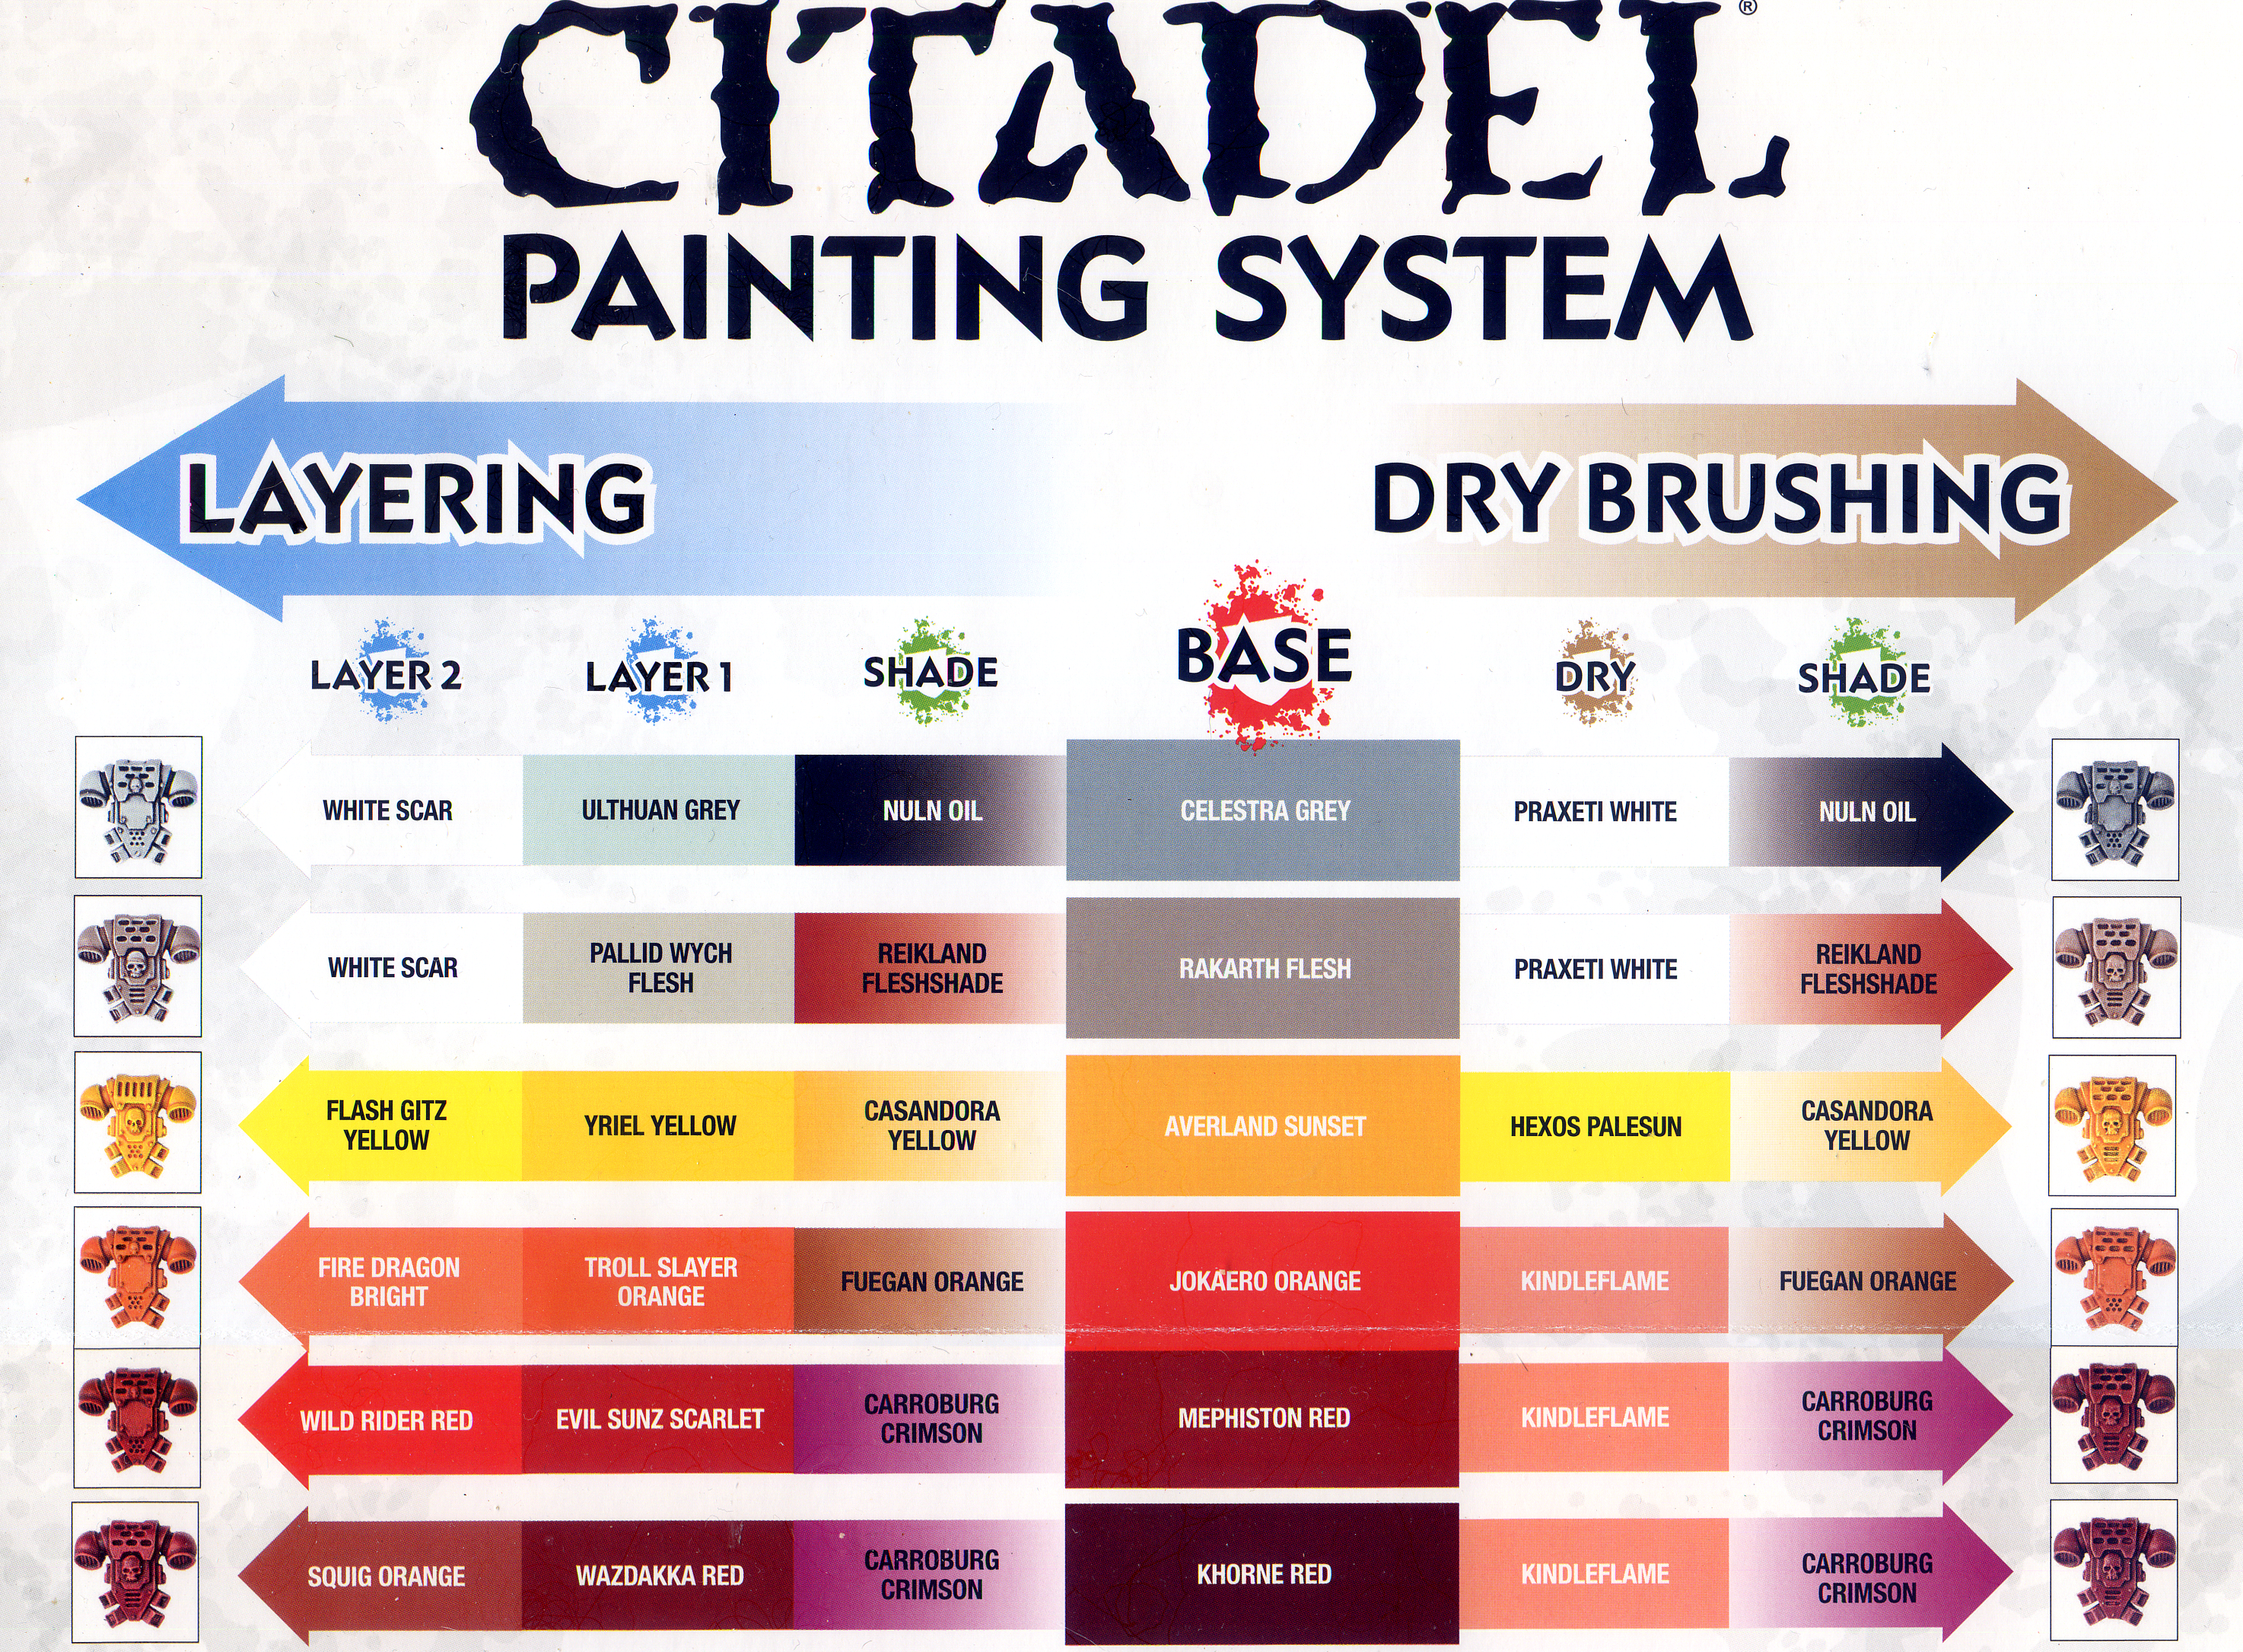 Painting Guide Citadel Painting Chart Part 1 Citadel Painting Chart Part 1 Gallery Dakkadakka Roll The Dice To See If I M Getting Drunk